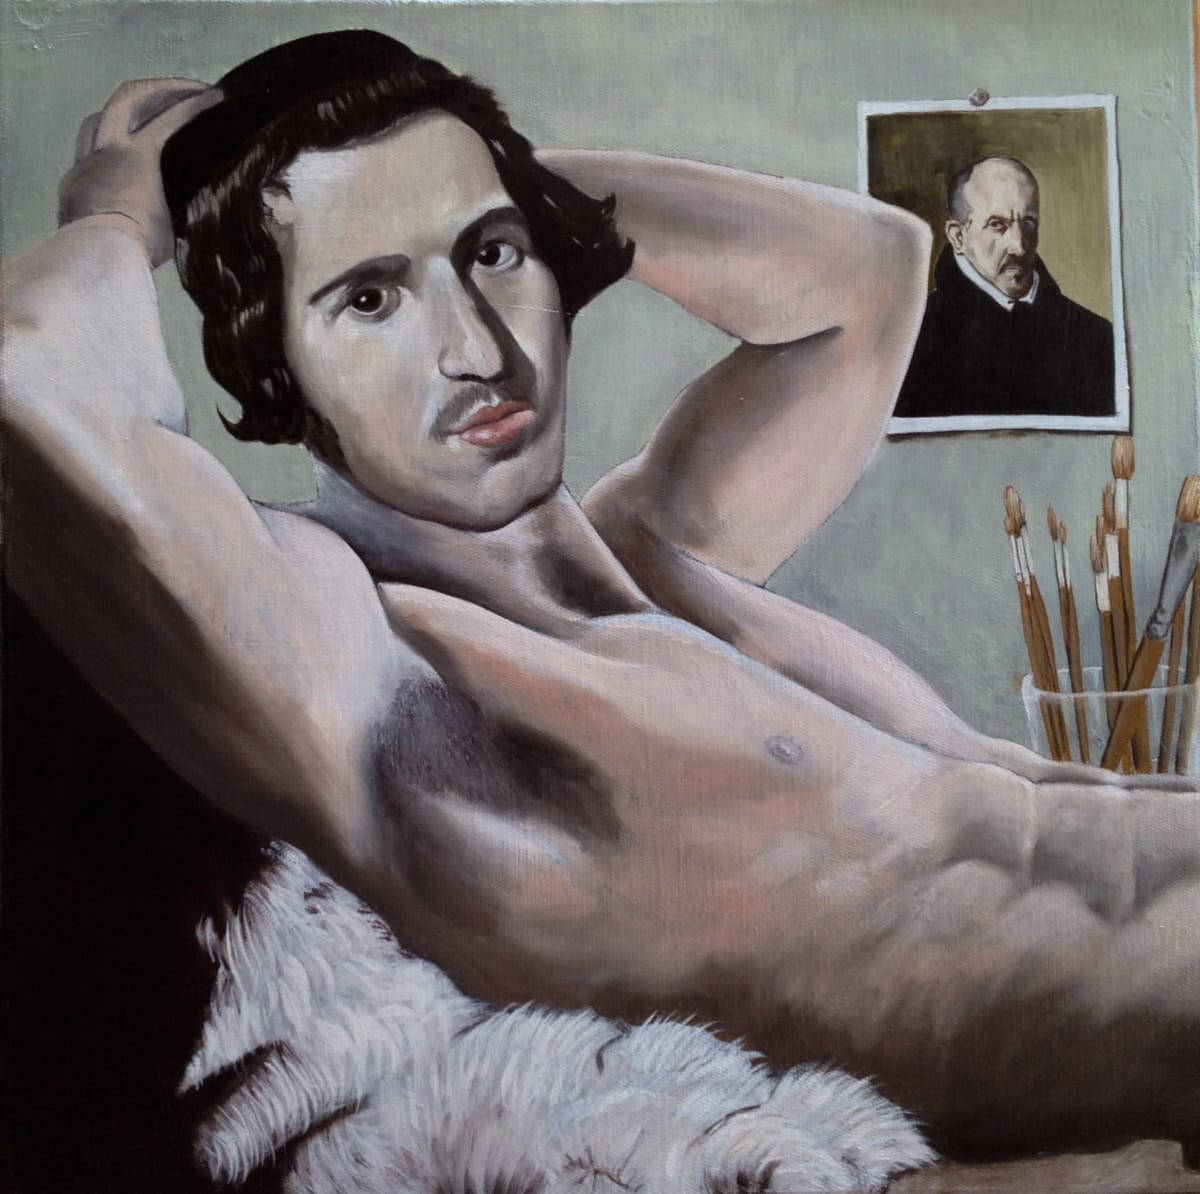 NAKED VELAZQUEZ #2 by Philippe Walker  Image: Based on the portrait of a young man by D Velazquez. Relaxed lying on a bear skin in front of one of his creation (a painting of an old man)